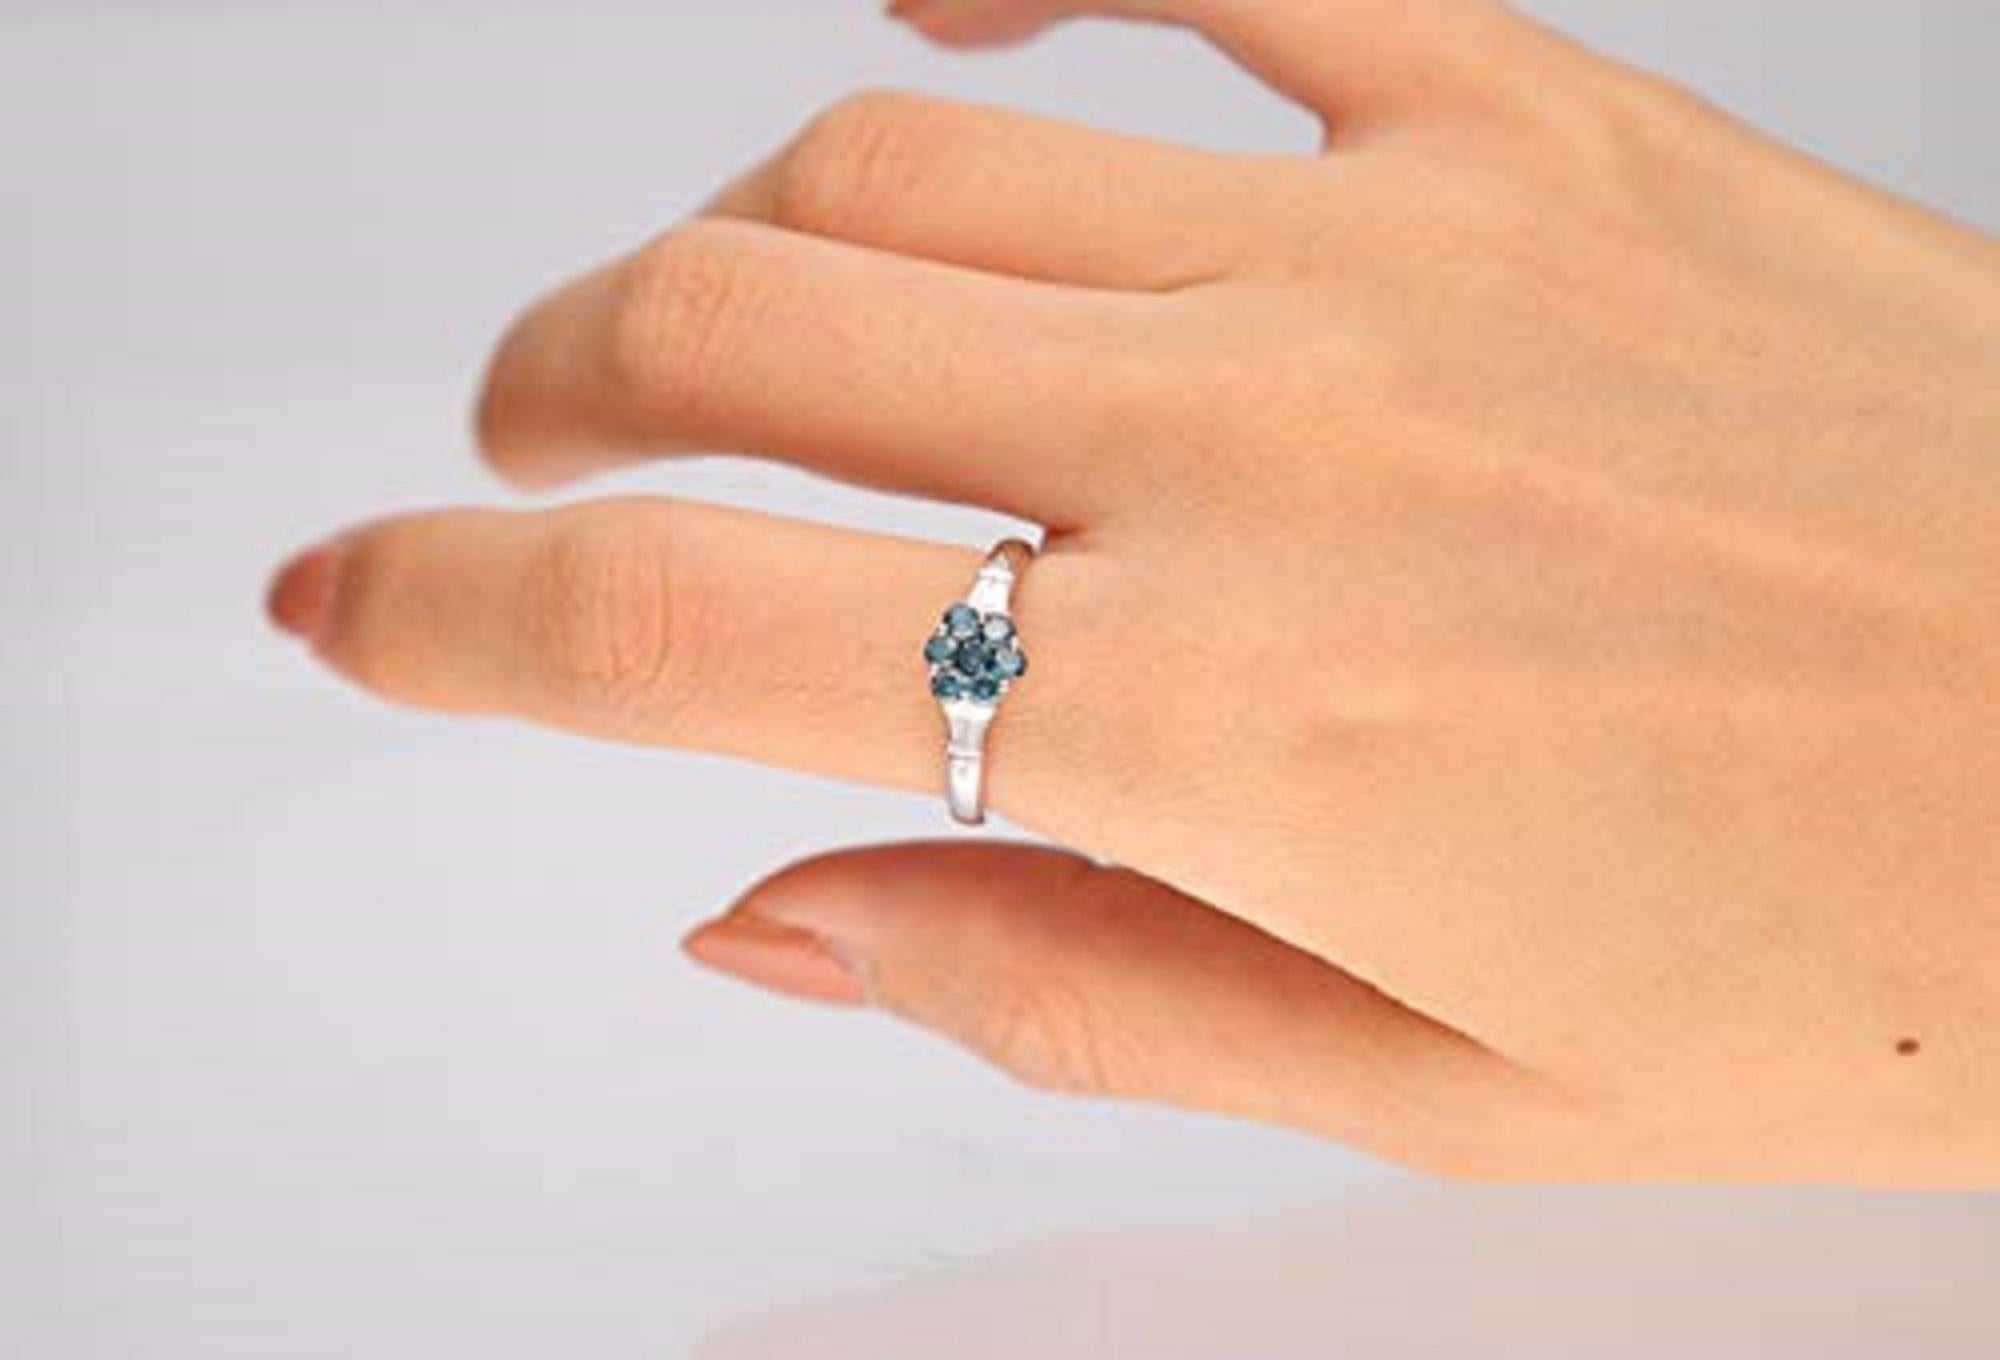 Stunning, timeless and classy eternity Unique Ring. Decorate yourself in luxury with this Gin & Grace Ring. The 10k White Gold jewelry boasts Round-Shape Prong Setting Genuine Blue Sapphire (7 pcs) 0.39 Carat, along with Natural Round cut white